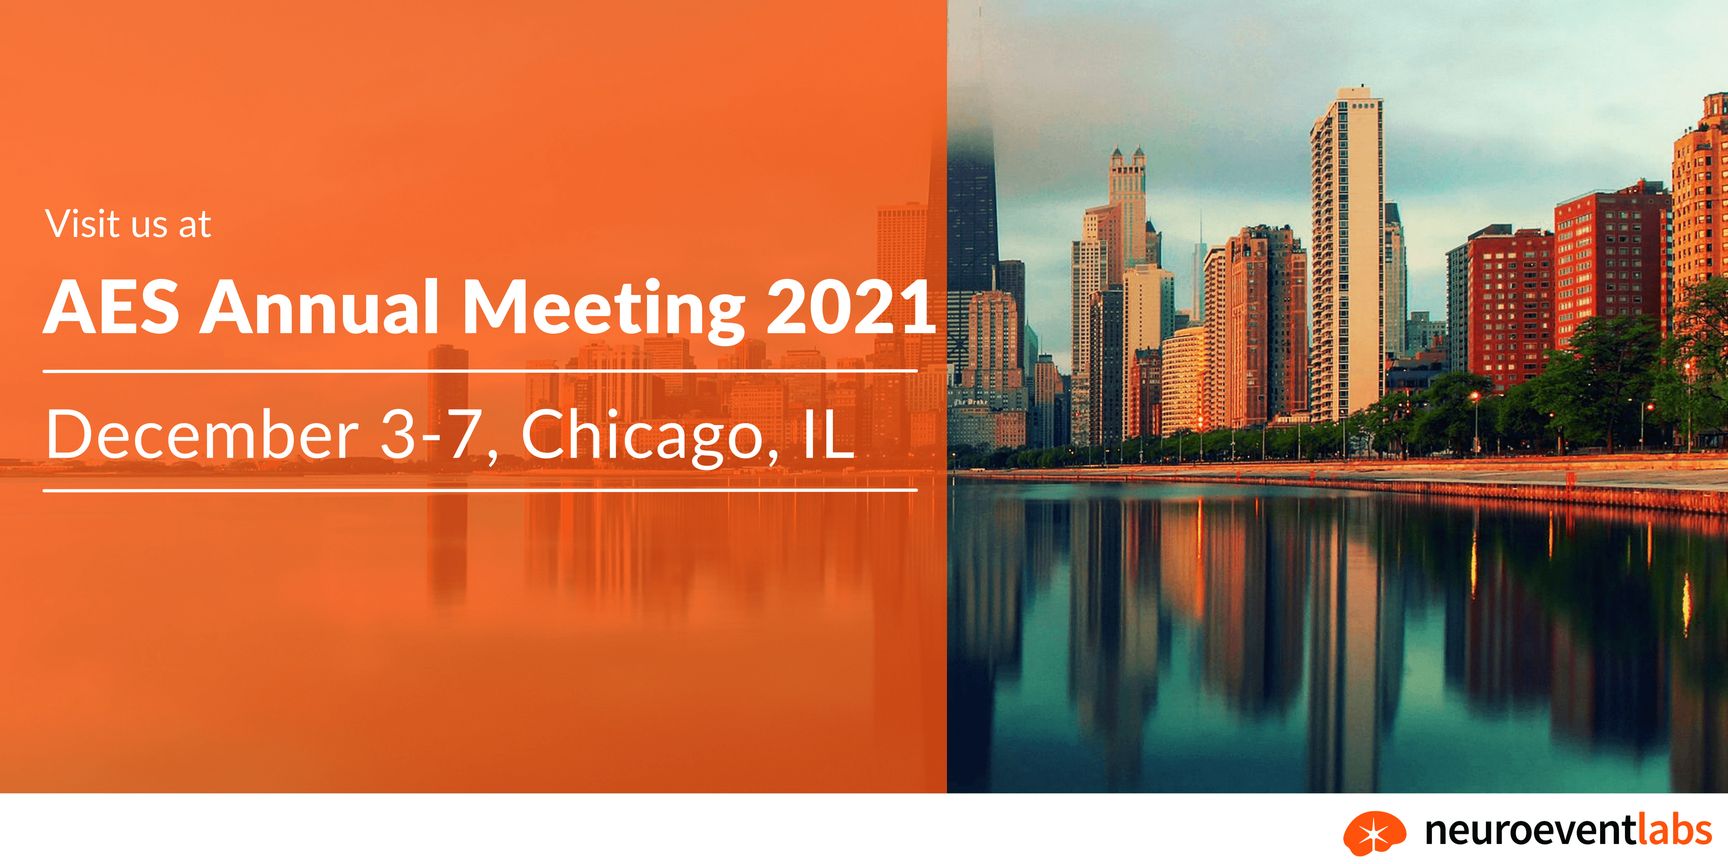 American Epilepsy Society (AES) 2021 Annual Meeting